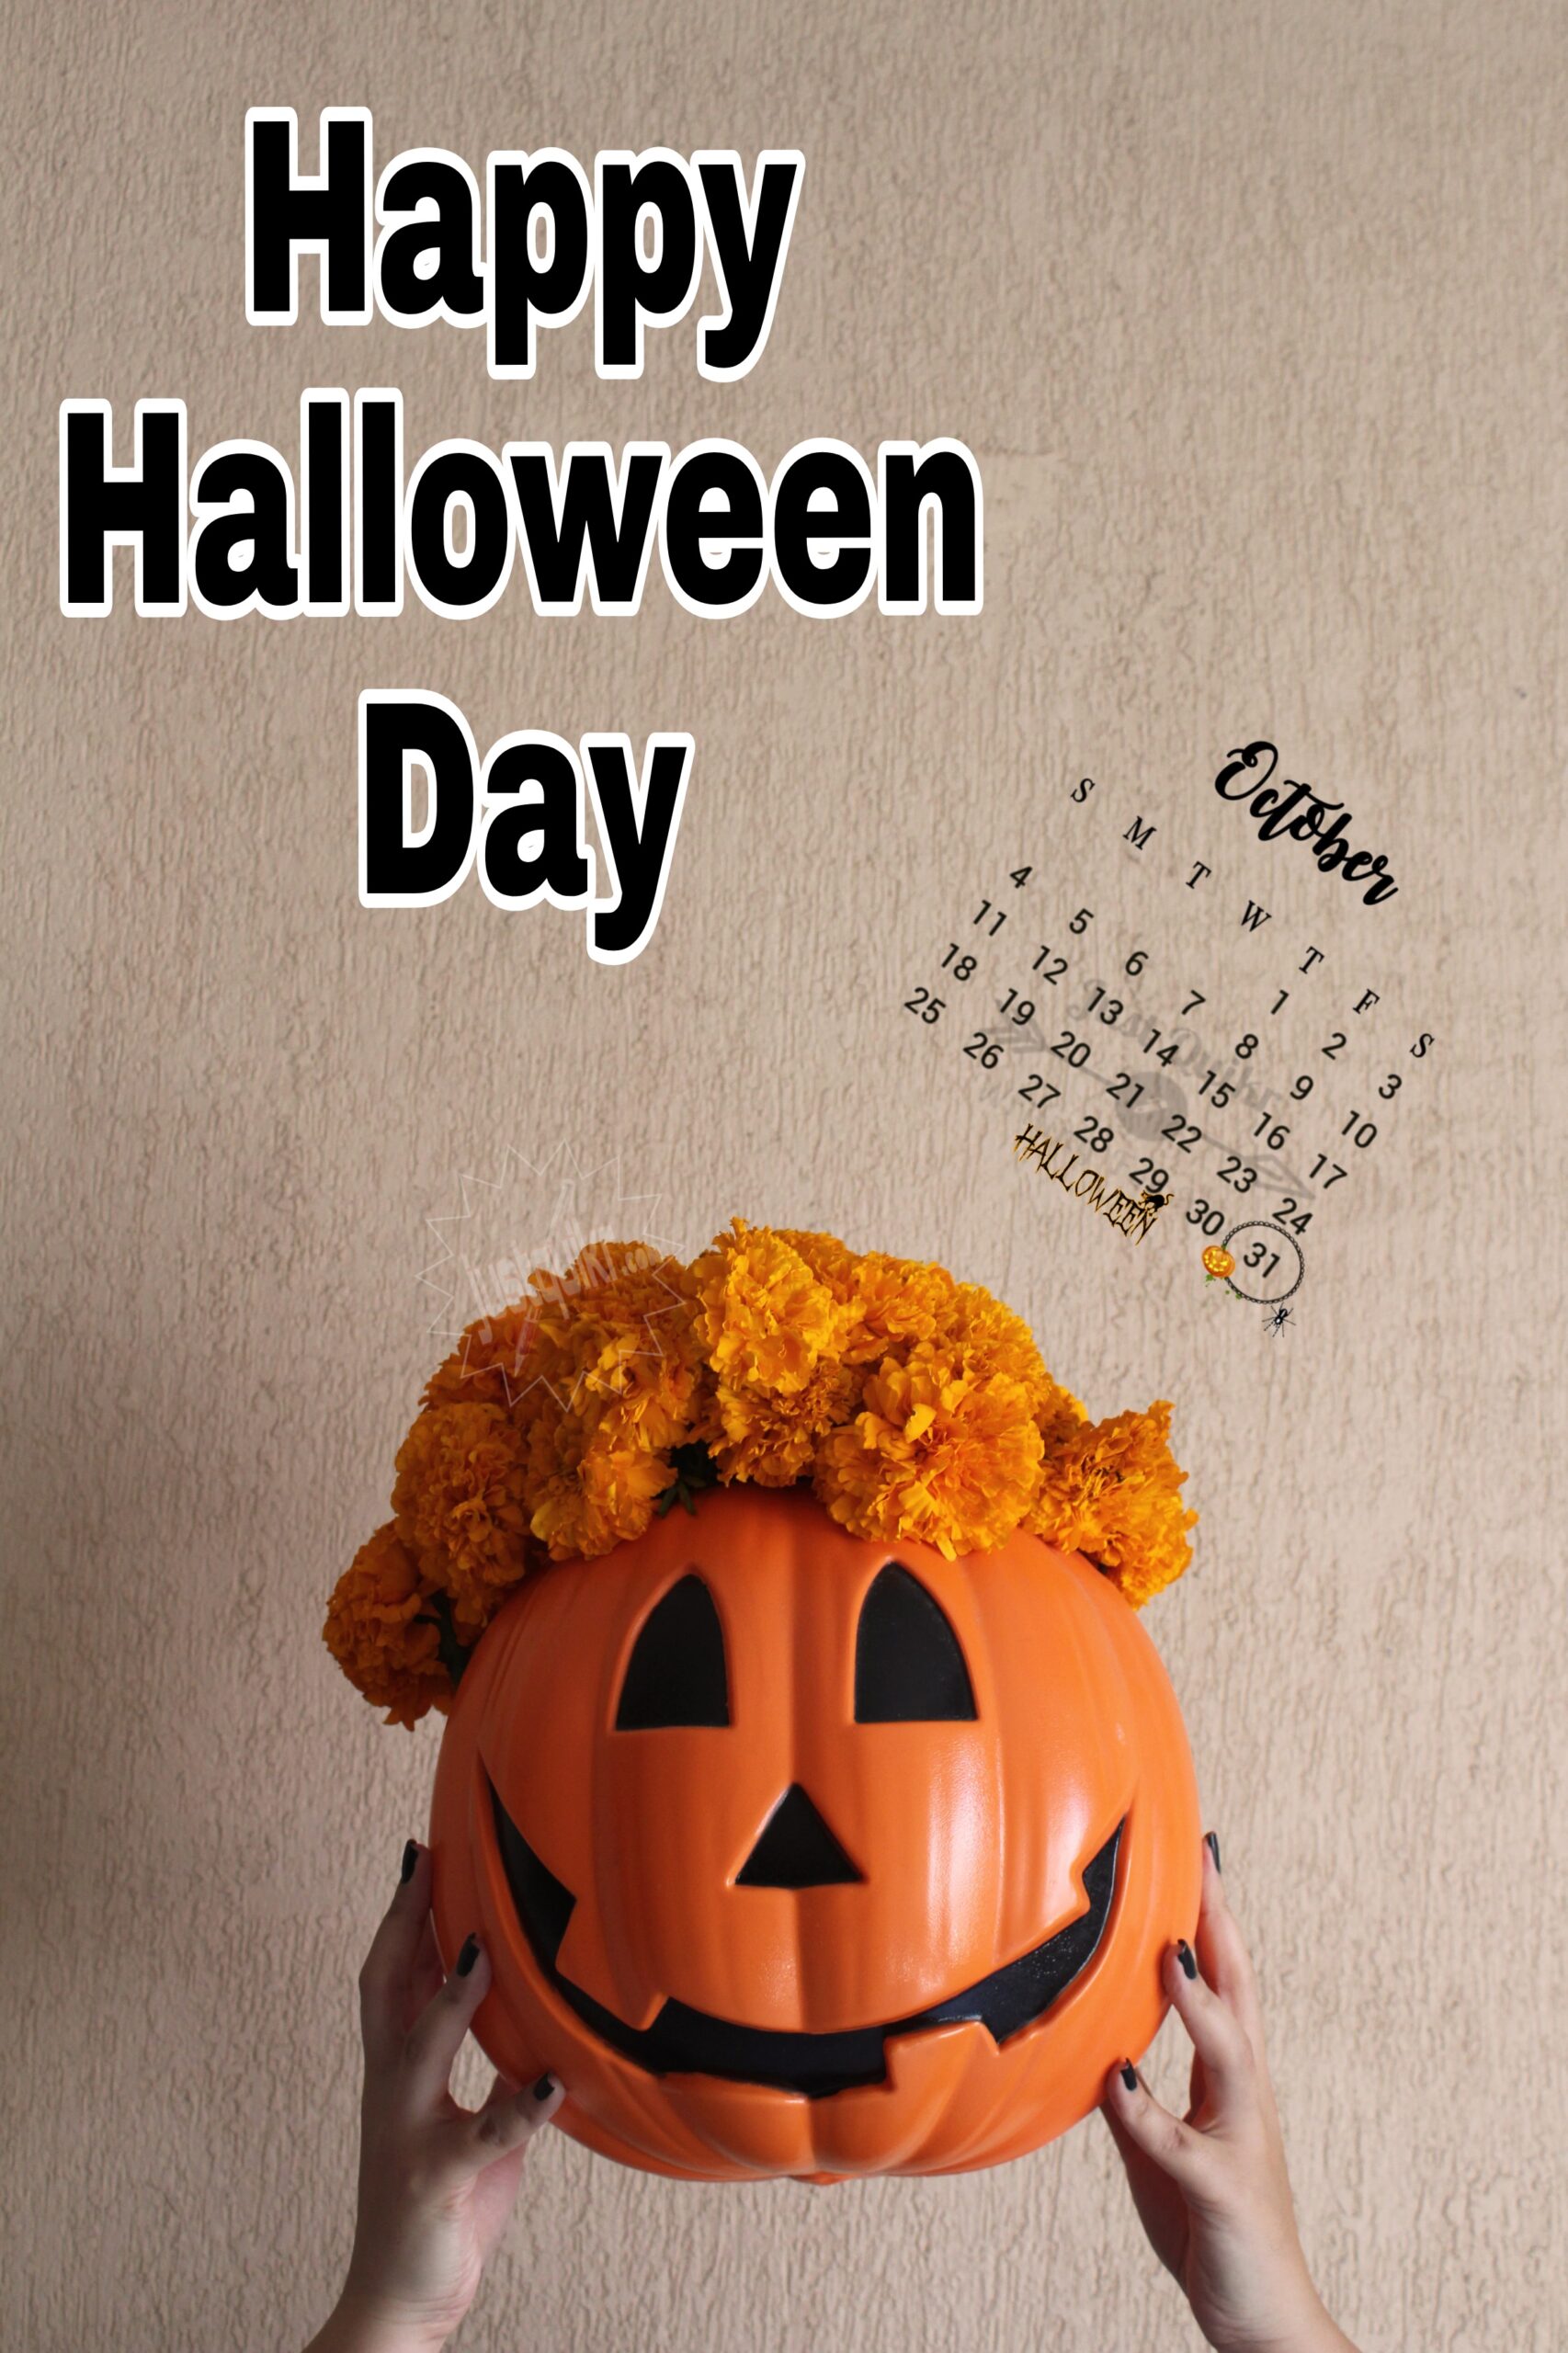 Halloween Day Greetings For Facebook